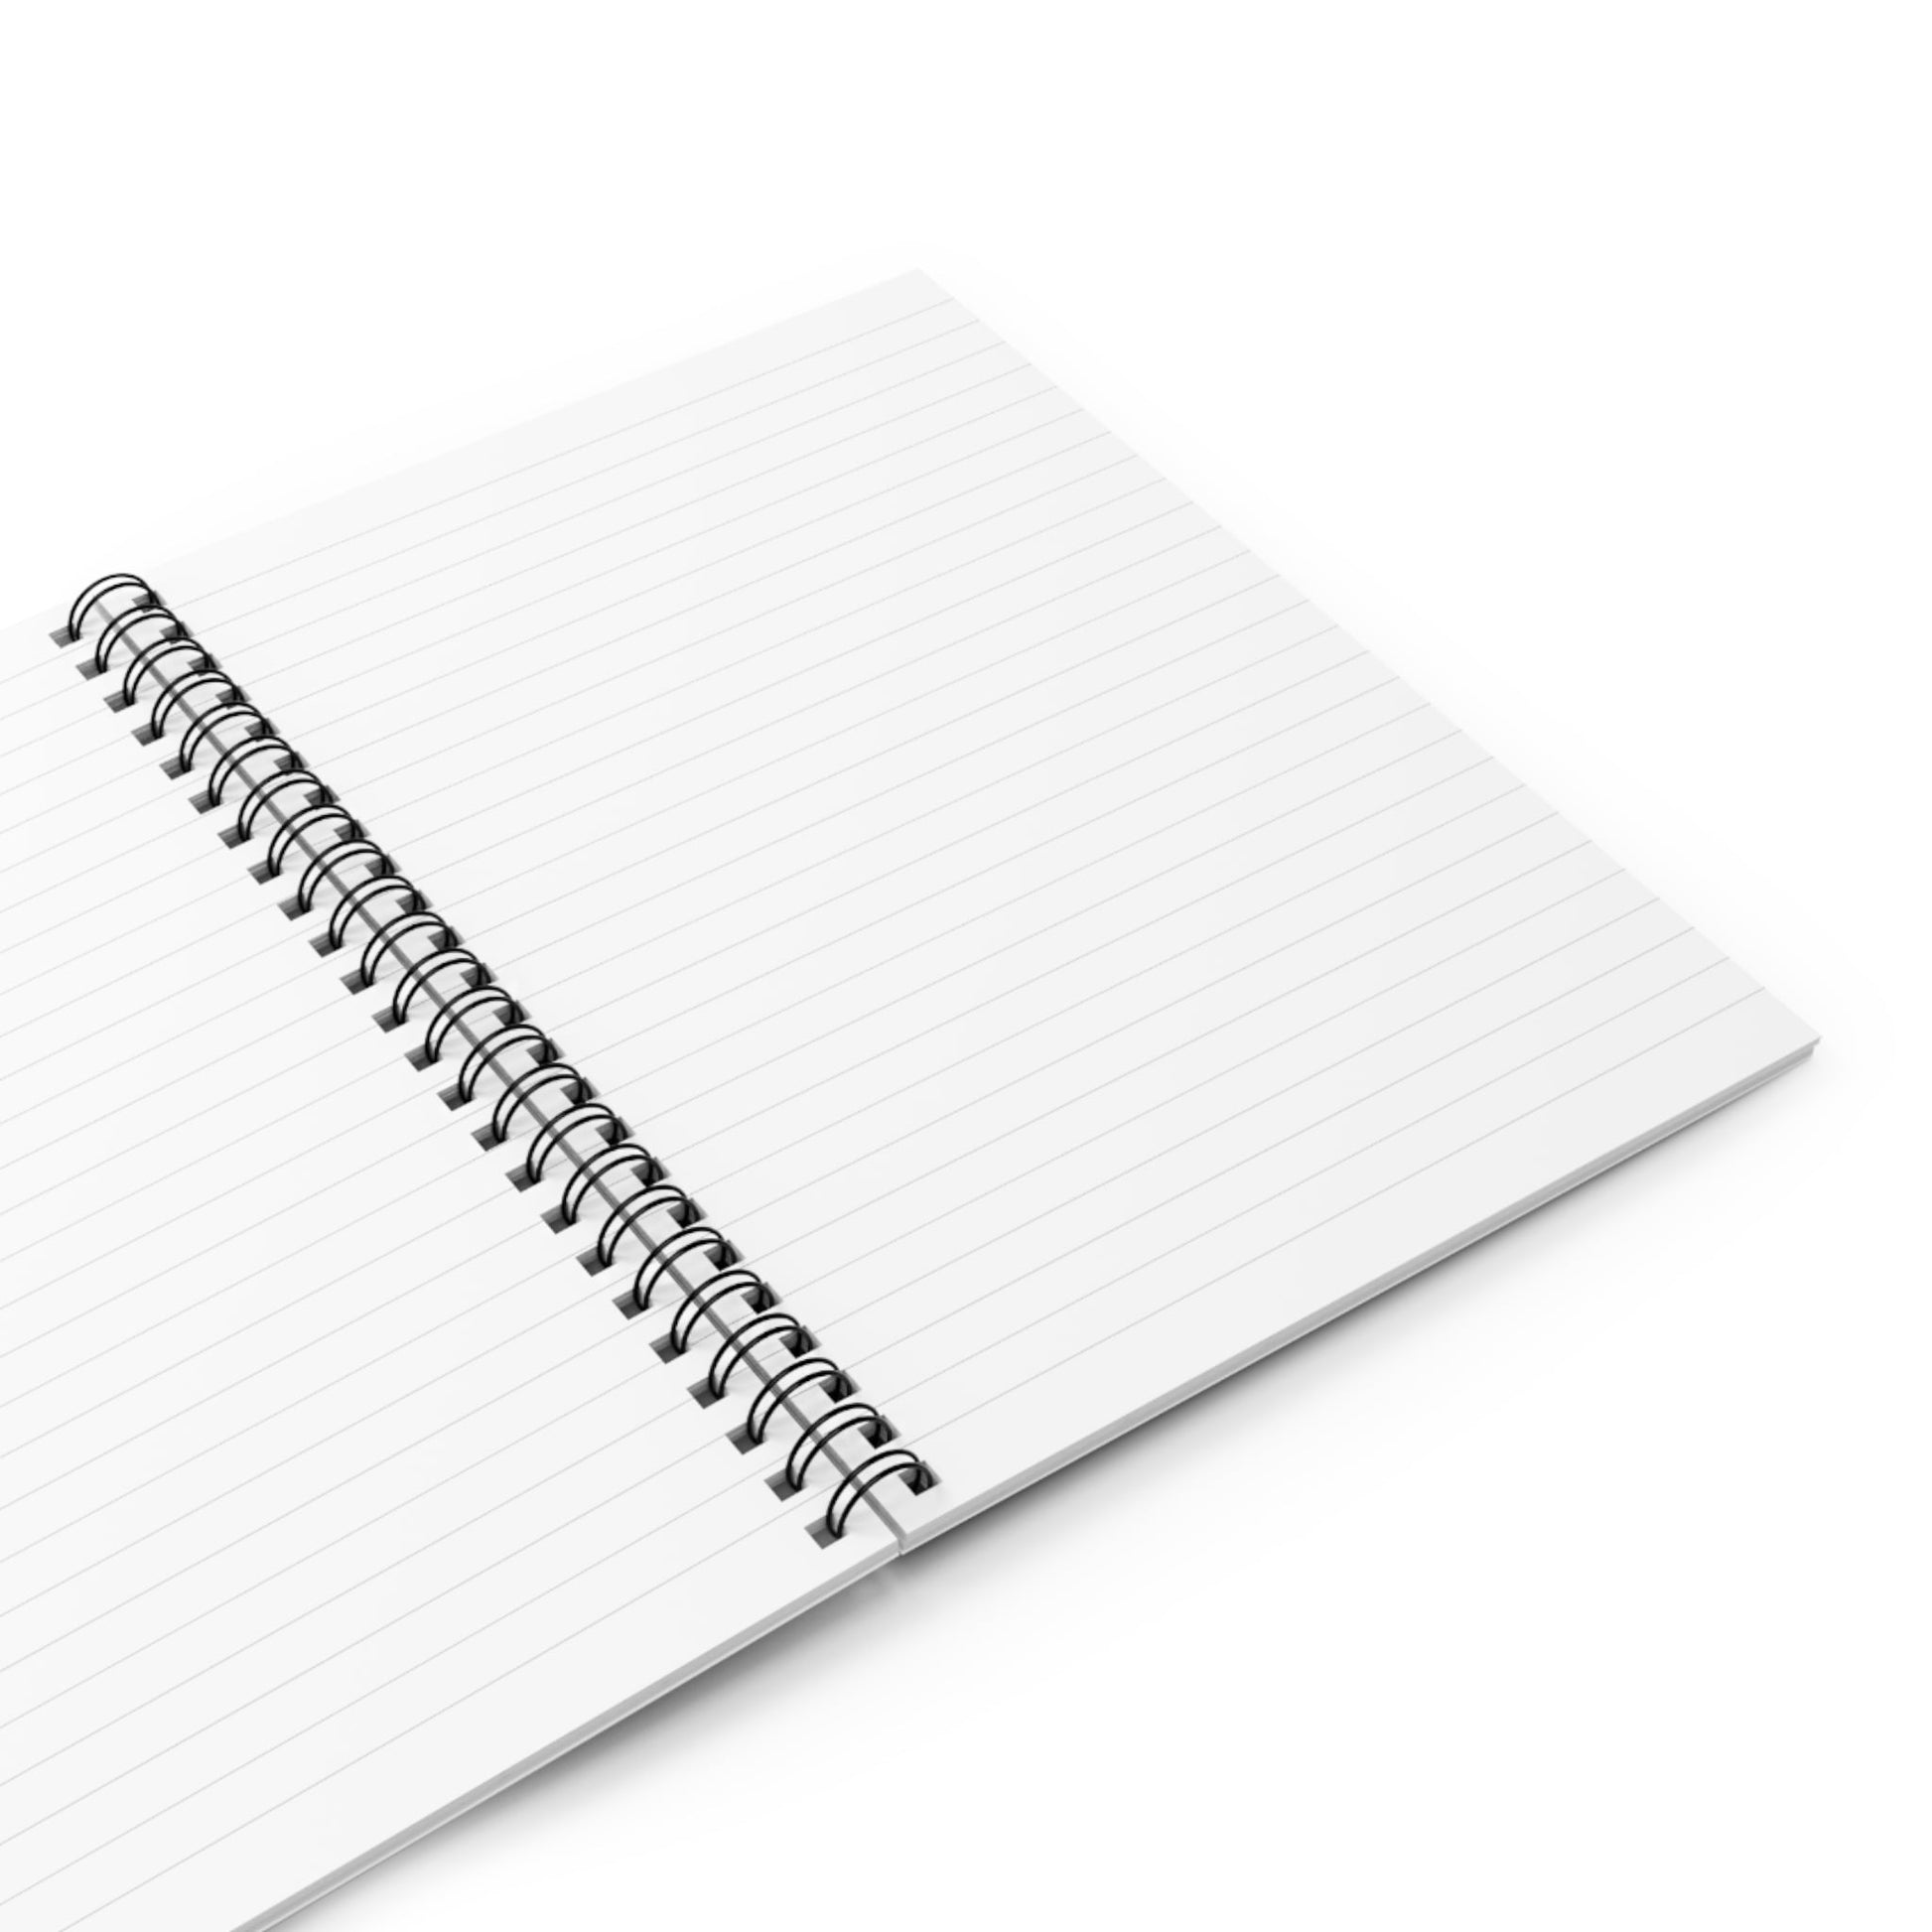 Spiral Notebook with Romanticism Cover Opened with Blank White College Ruled Pages